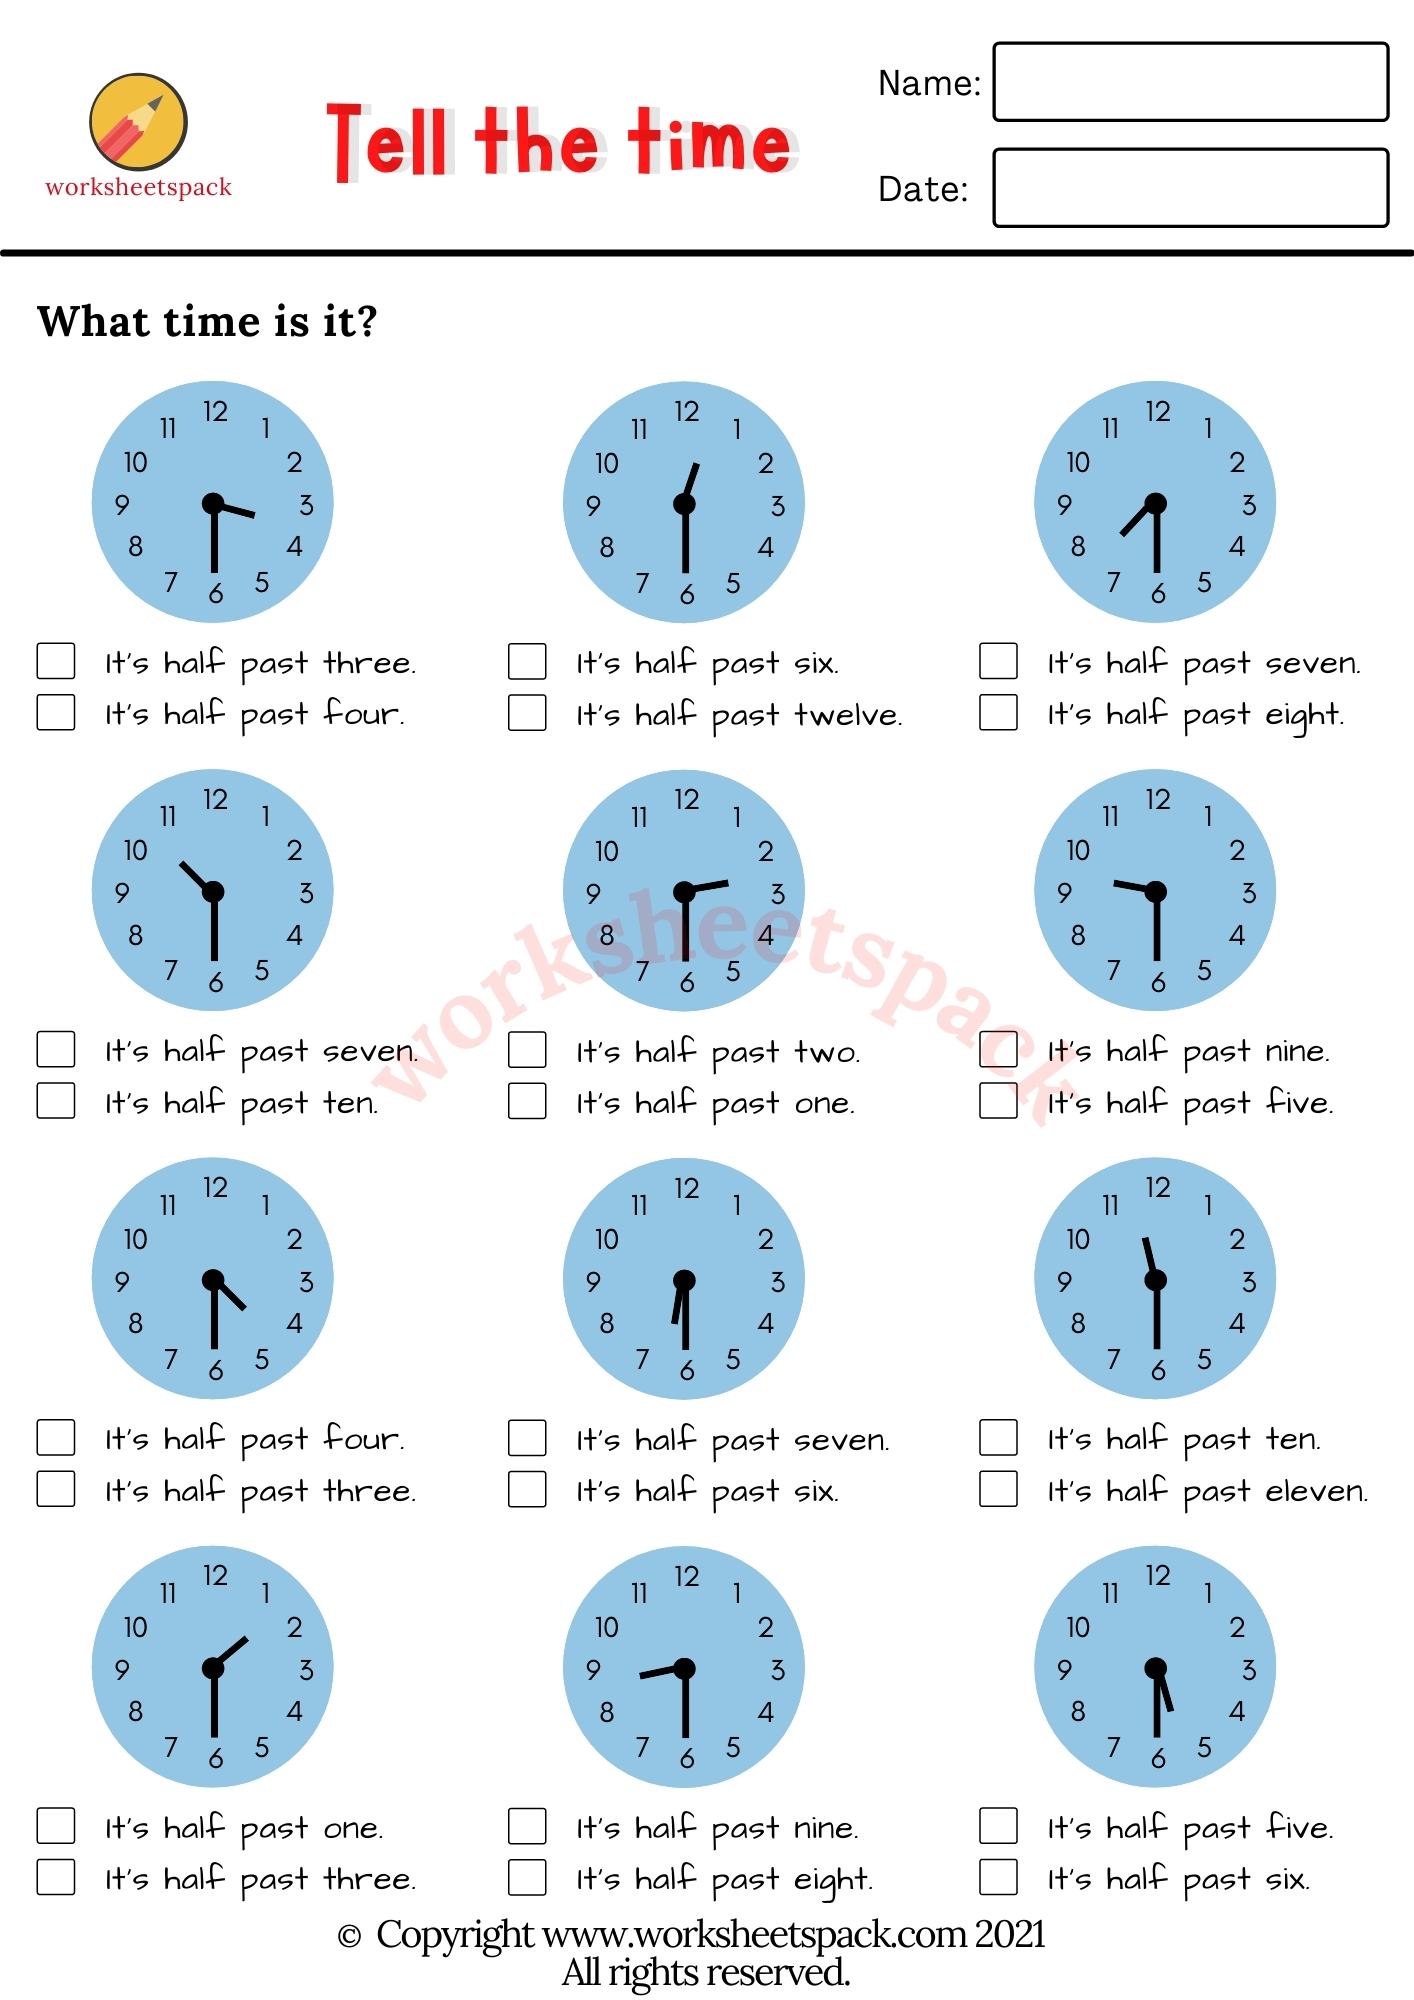 tell-the-time-worksheets-worksheetspack